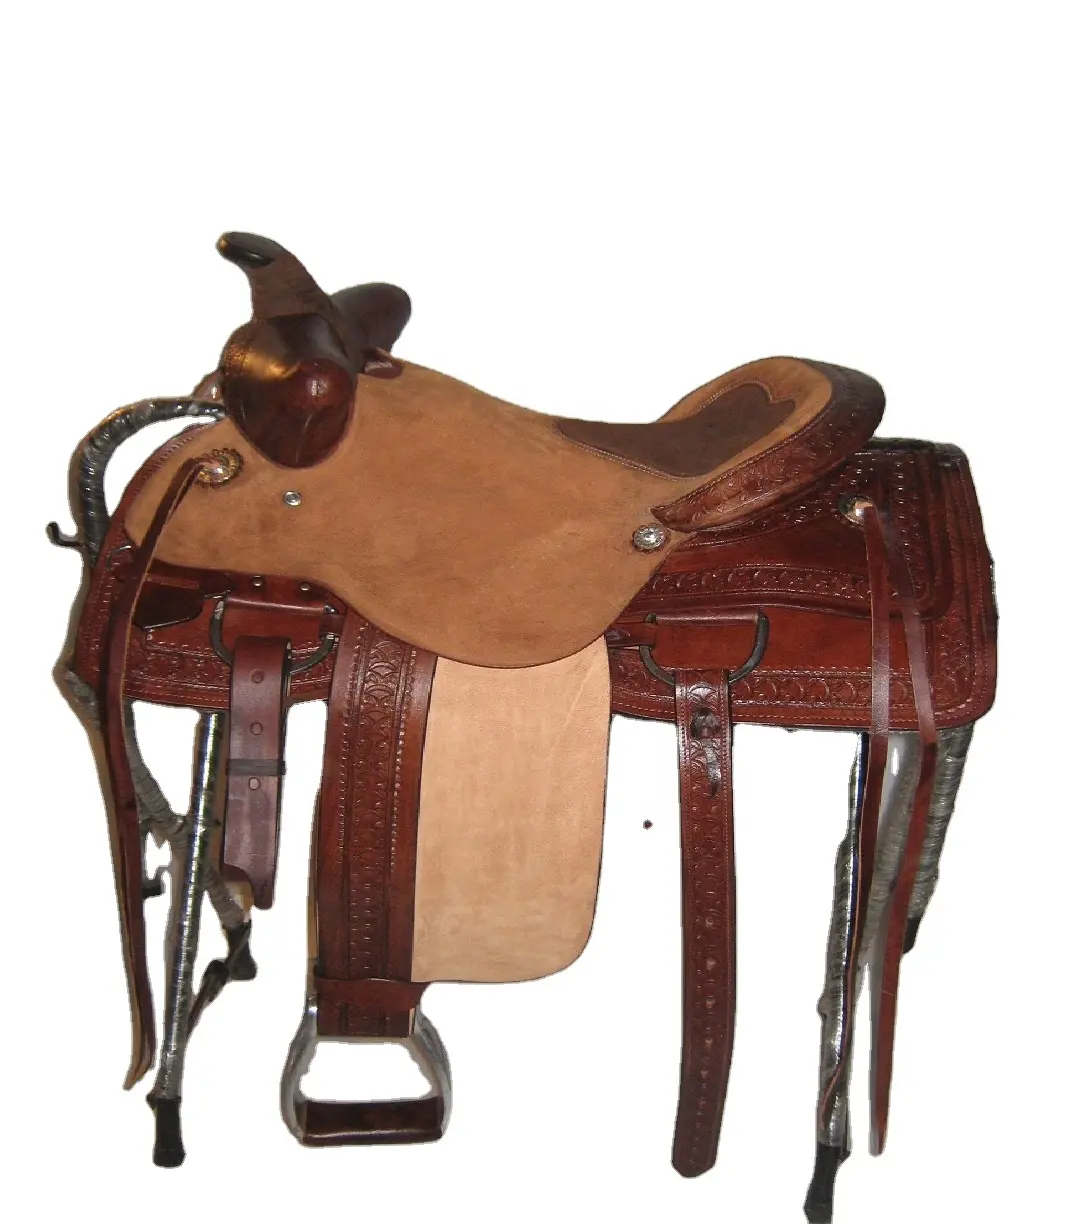 Western Roper Leather Horse Saddle With Smart Fiber Glass Tree And Strong Aluminum Stirrups Available In 15",16",17"